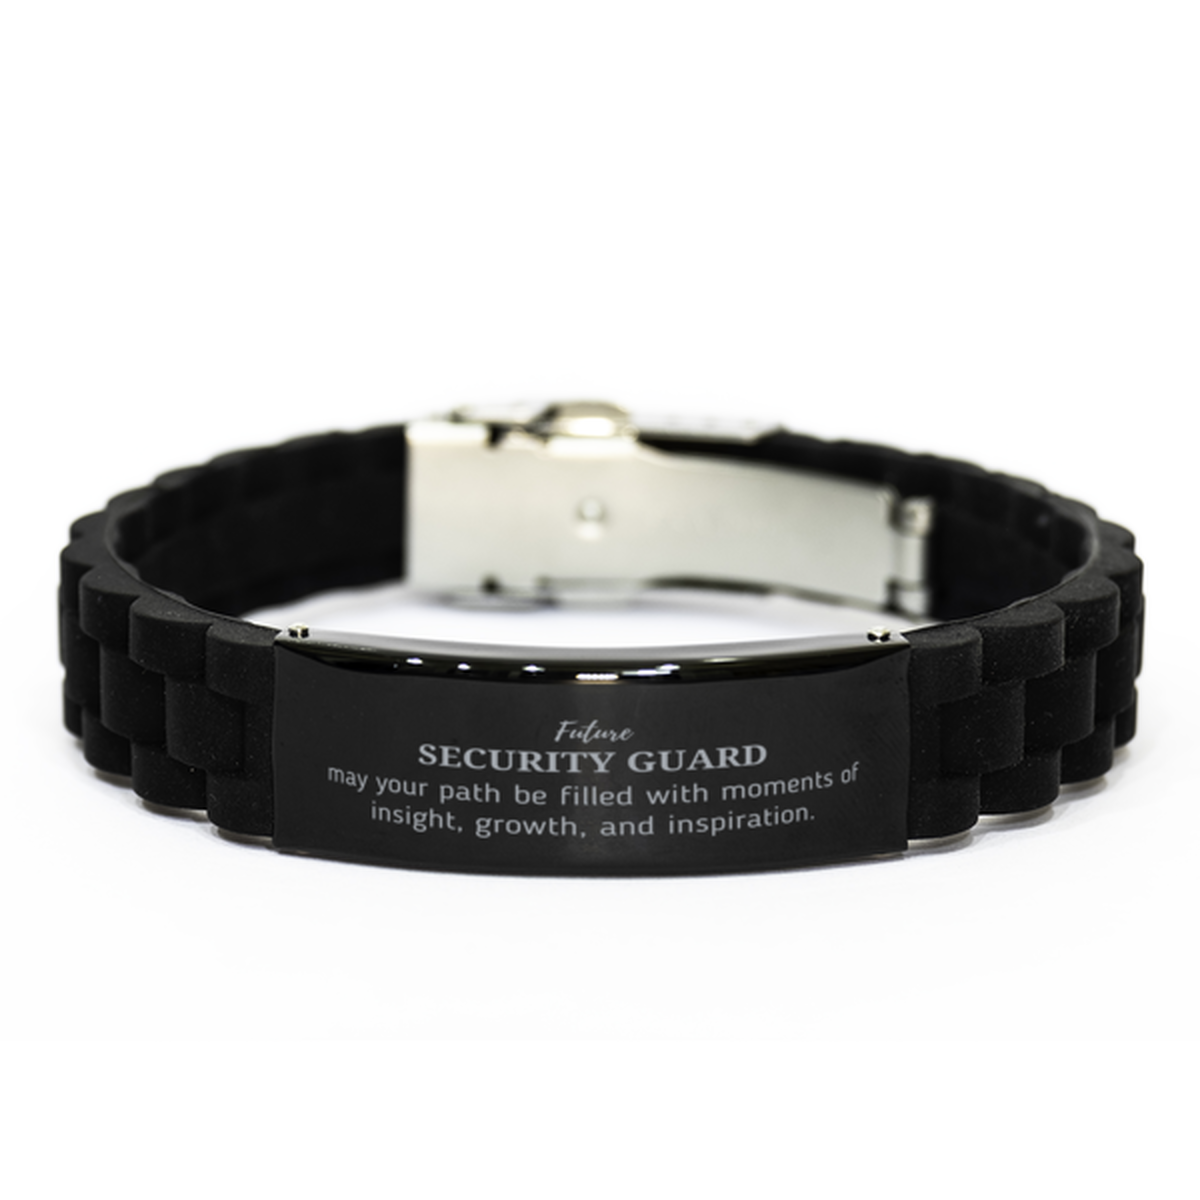 Future Security Guard Gifts, May your path be filled with moments of insight, Graduation Gifts for New Security Guard, Christmas Unique Black Glidelock Clasp Bracelet For Men, Women, Friends